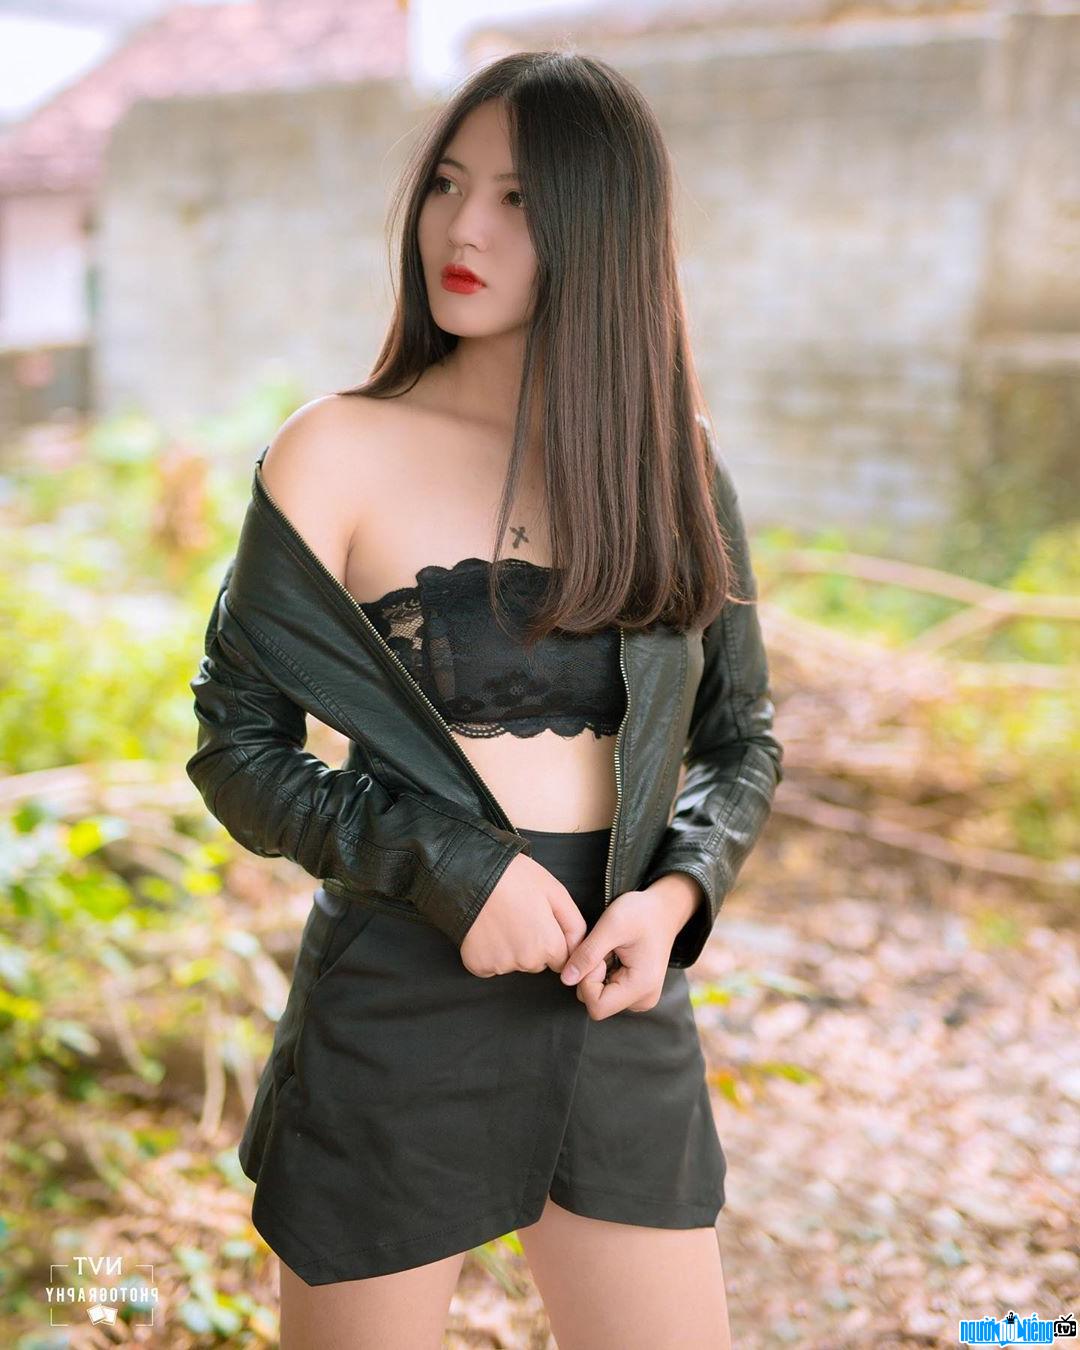  Khanh Chi's image is beautiful and personality